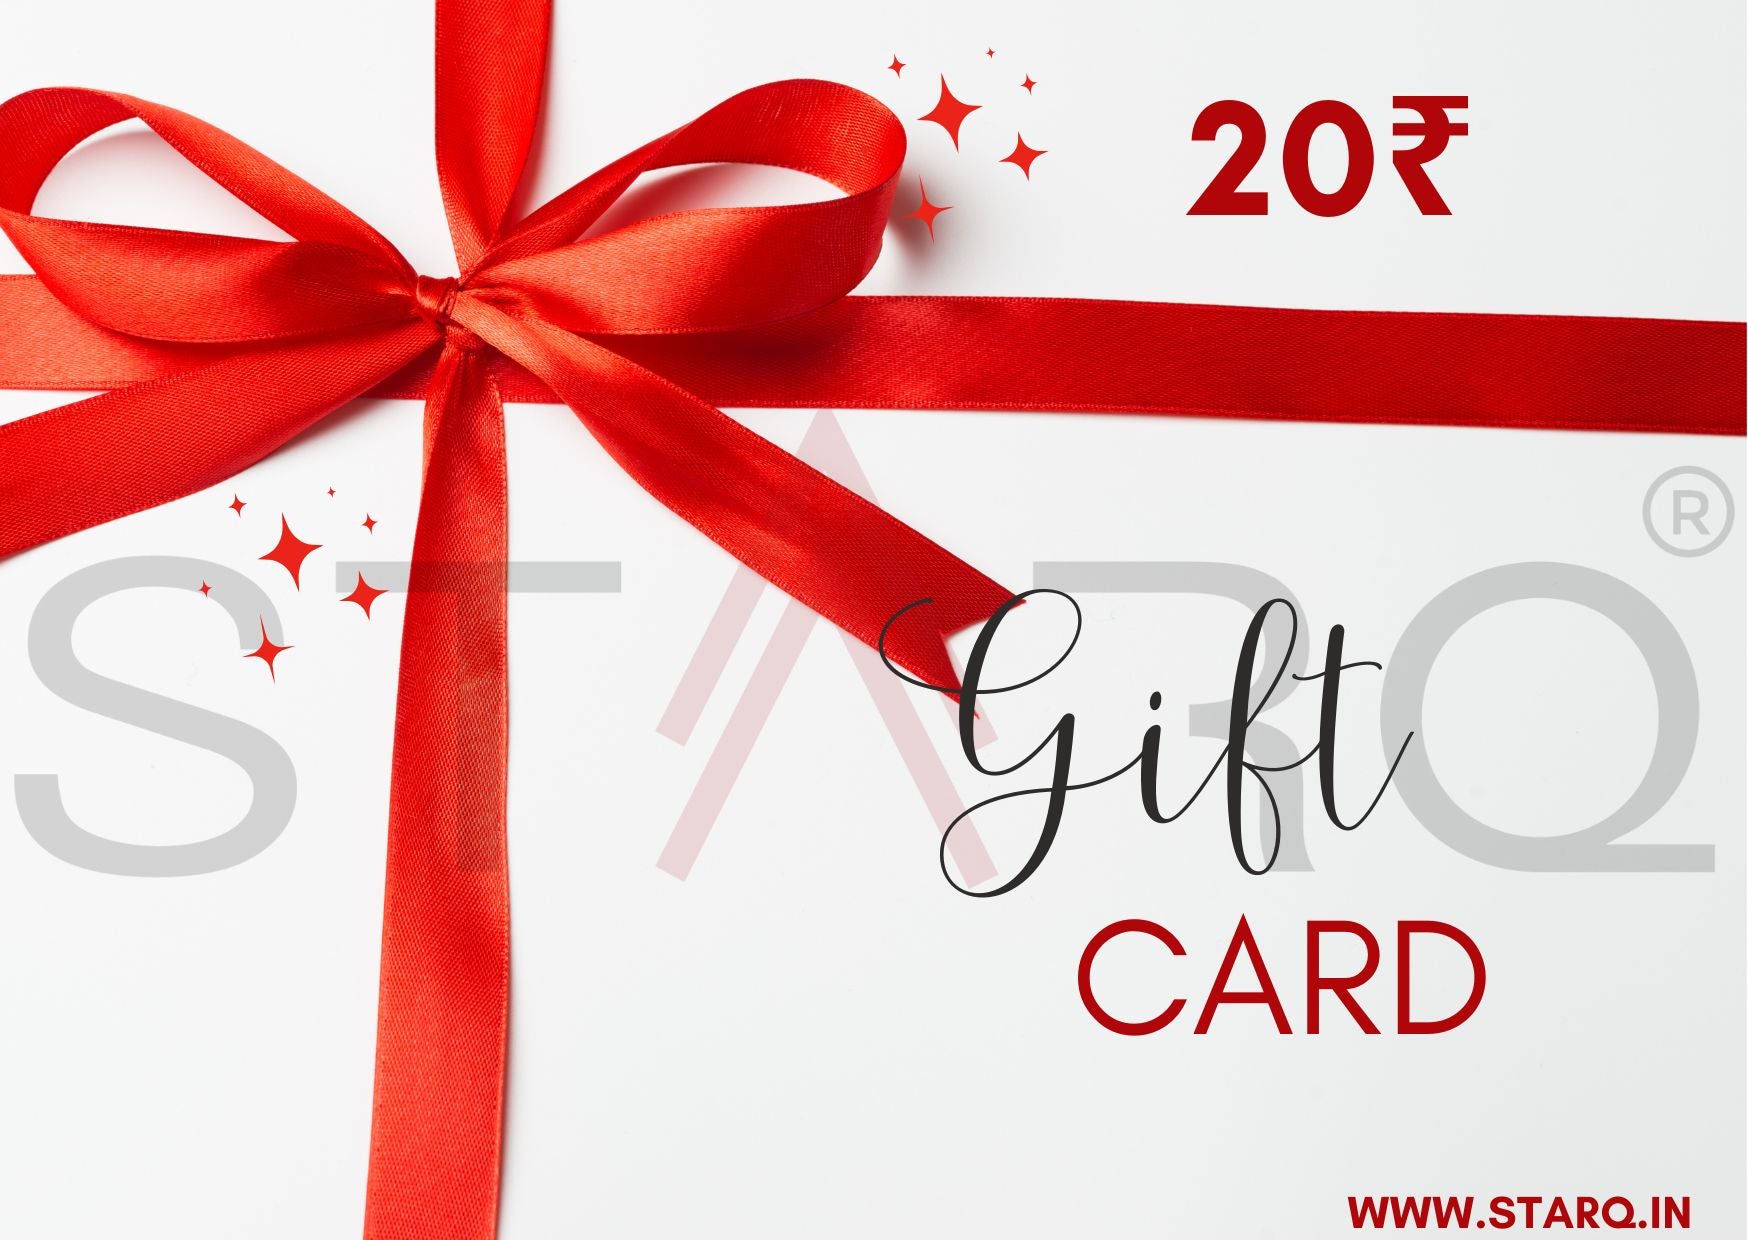 Luxury Gift Card Voucher Template Graphic by Artmr · Creative Fabrica